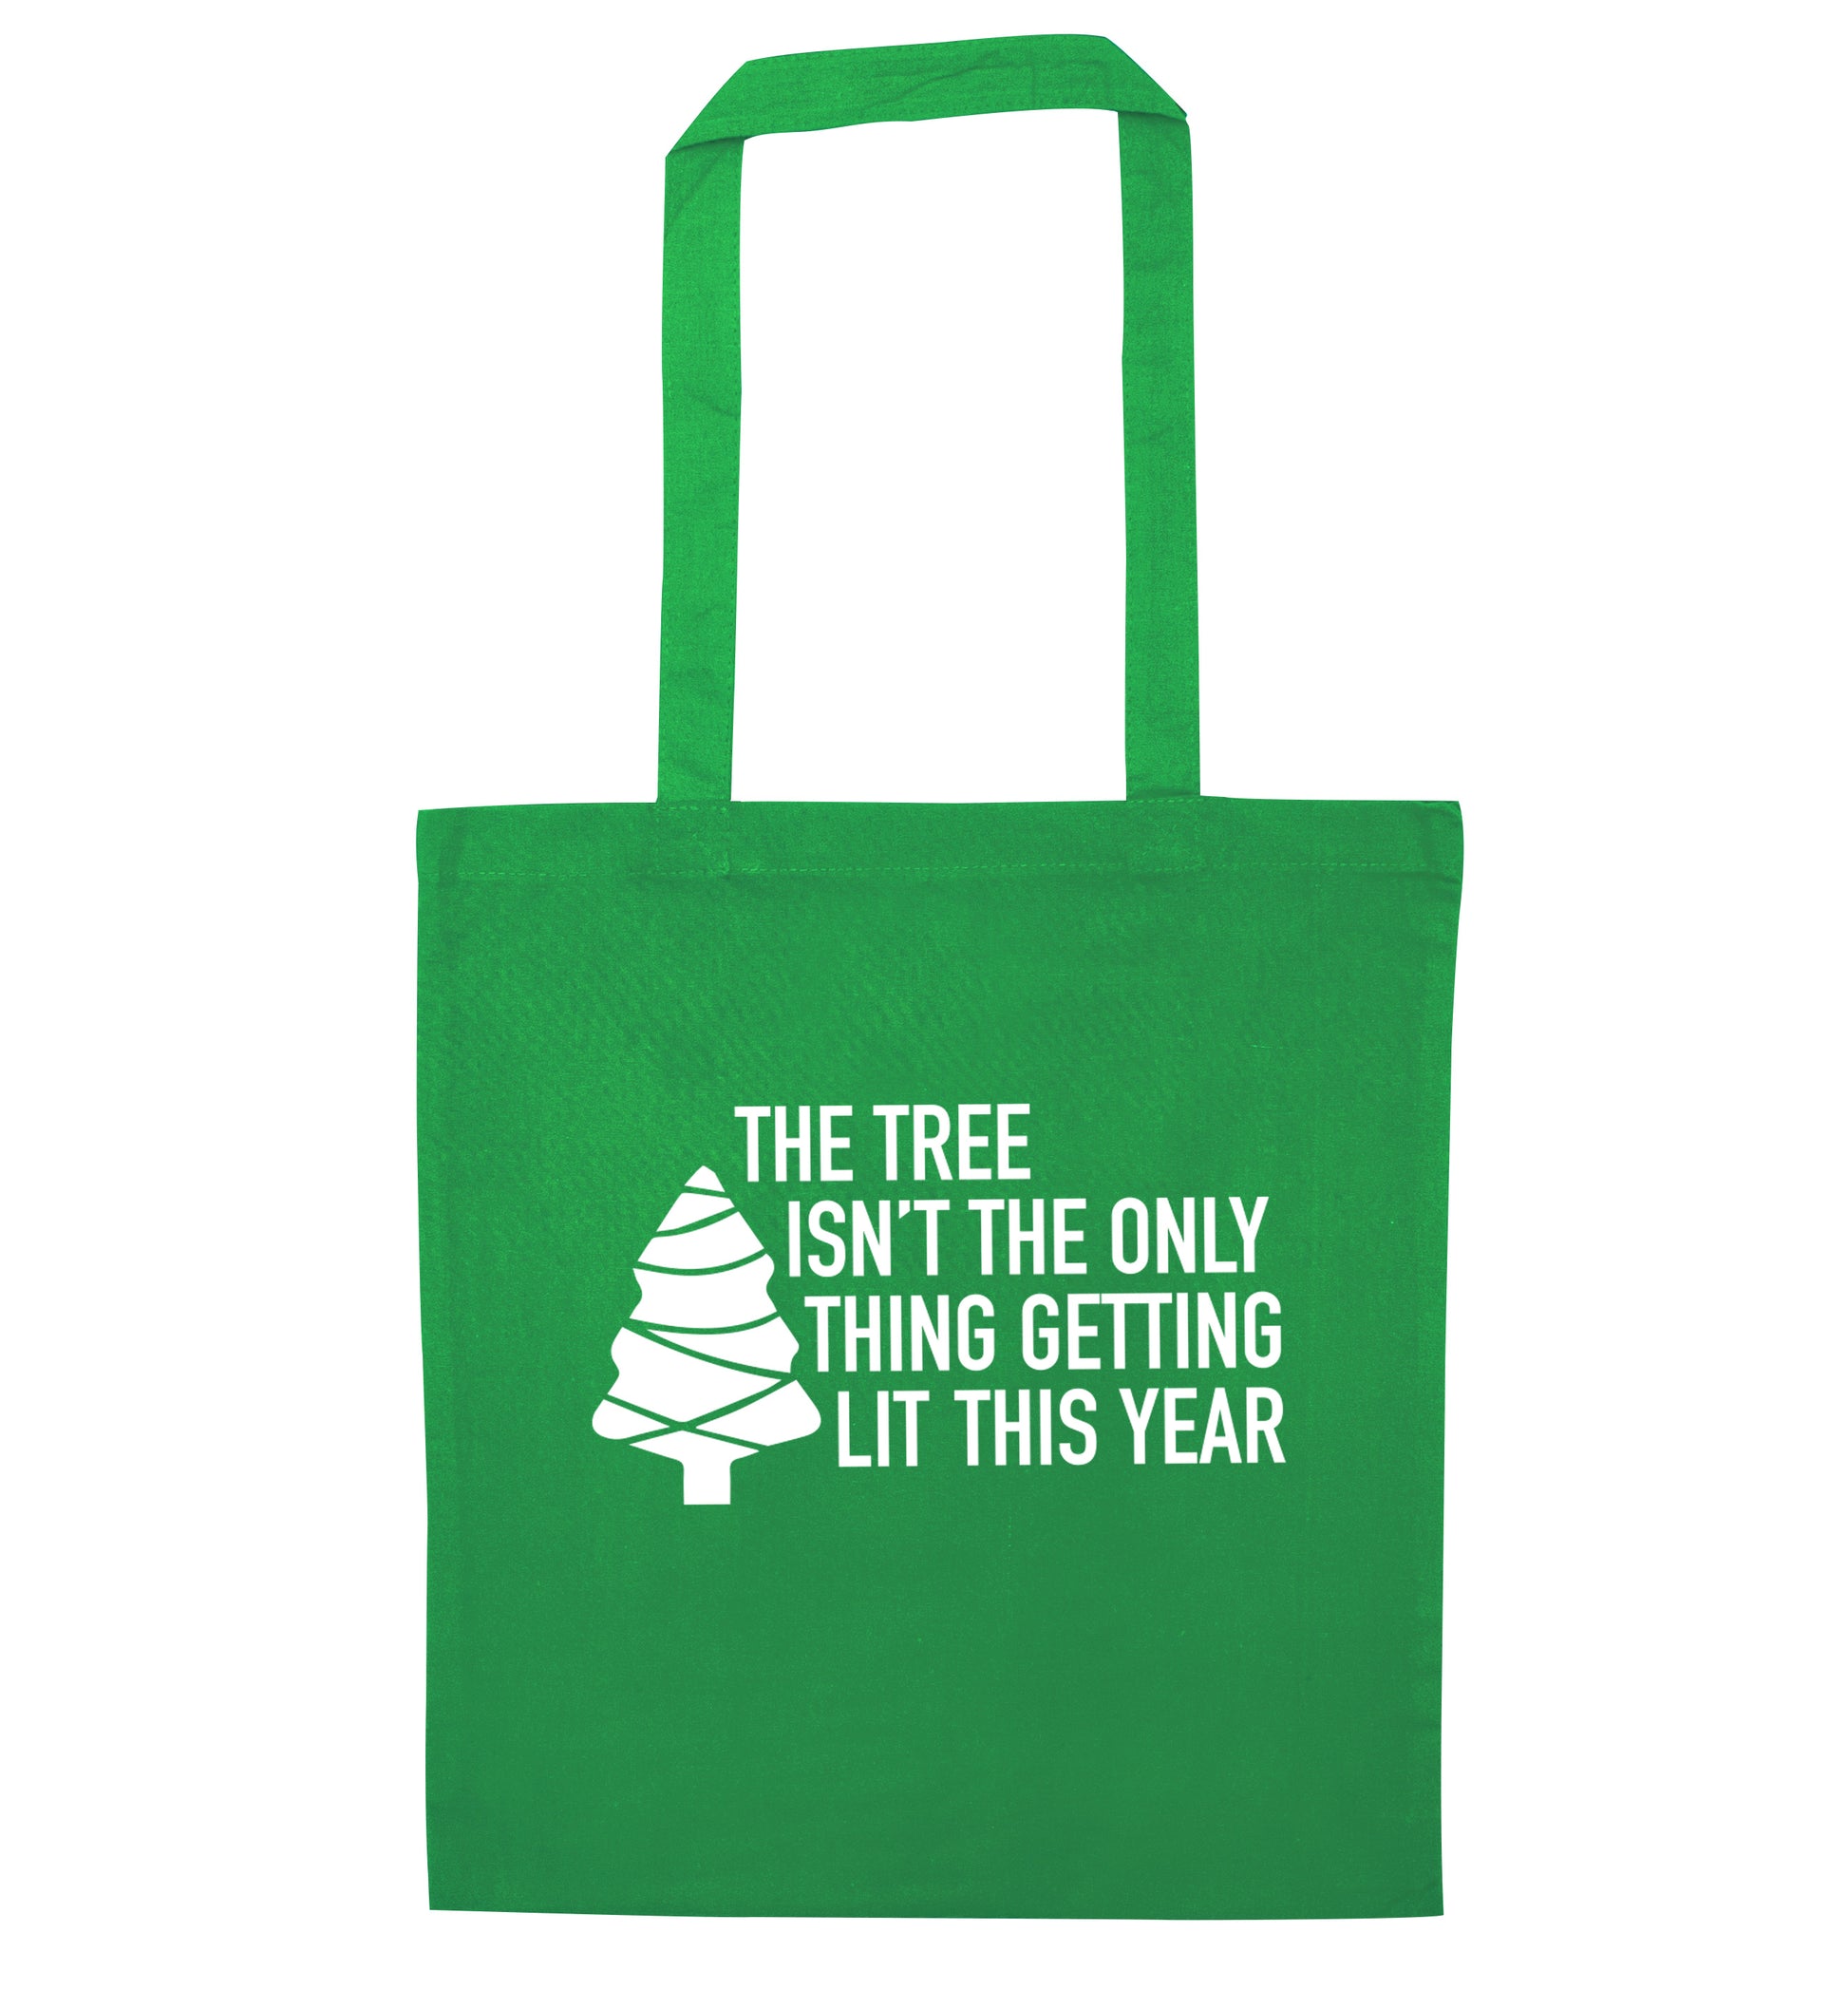 The tree isn't the only thing getting lit this year green tote bag